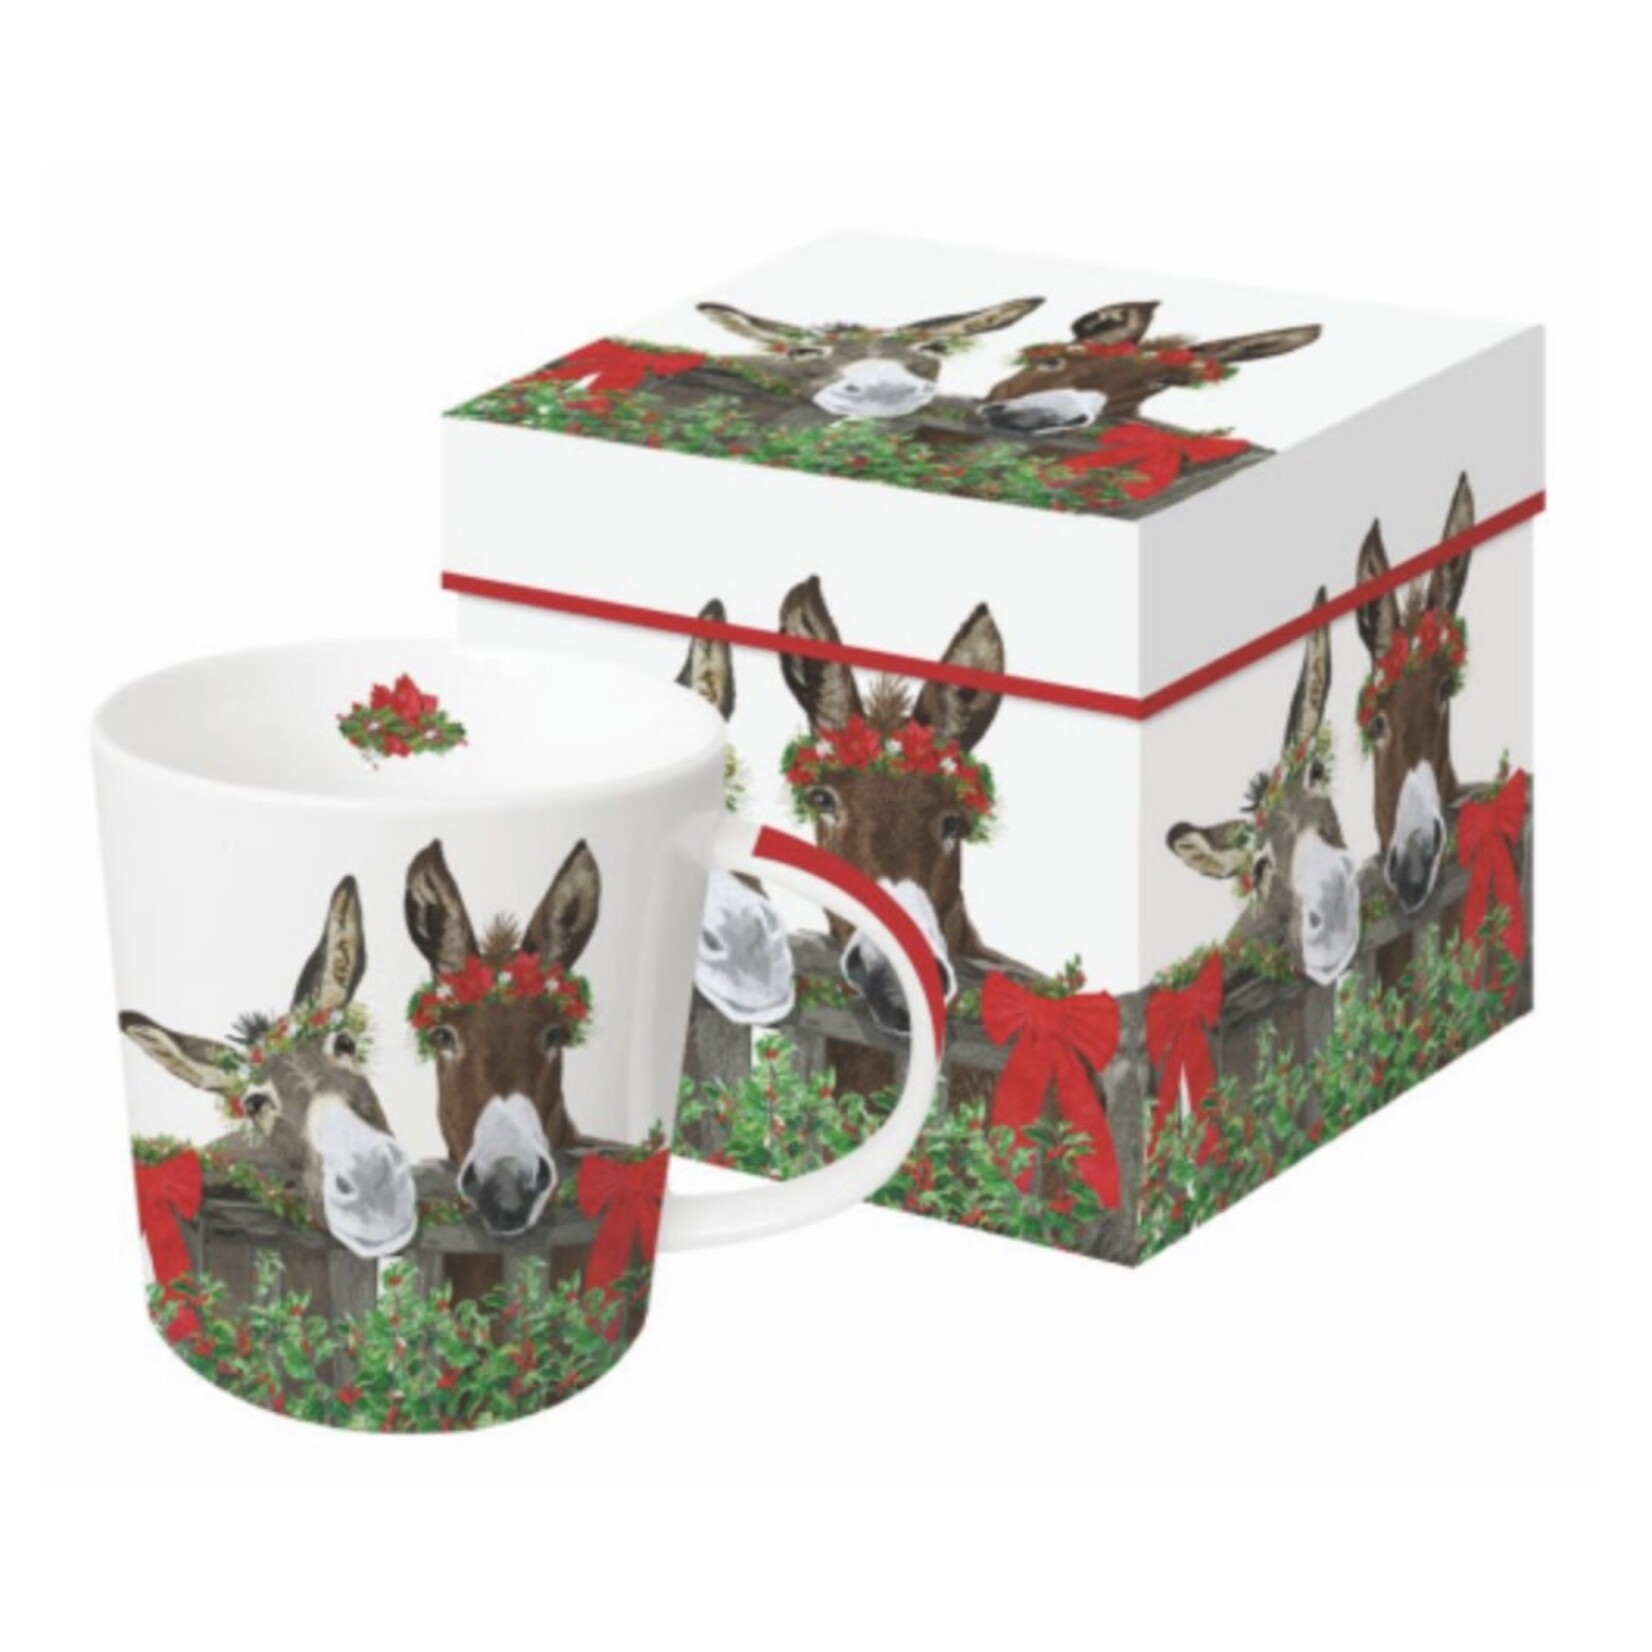 PAPER PRODUCTS DESIGN PPD Mug in Gift Box - PBJ Holiday